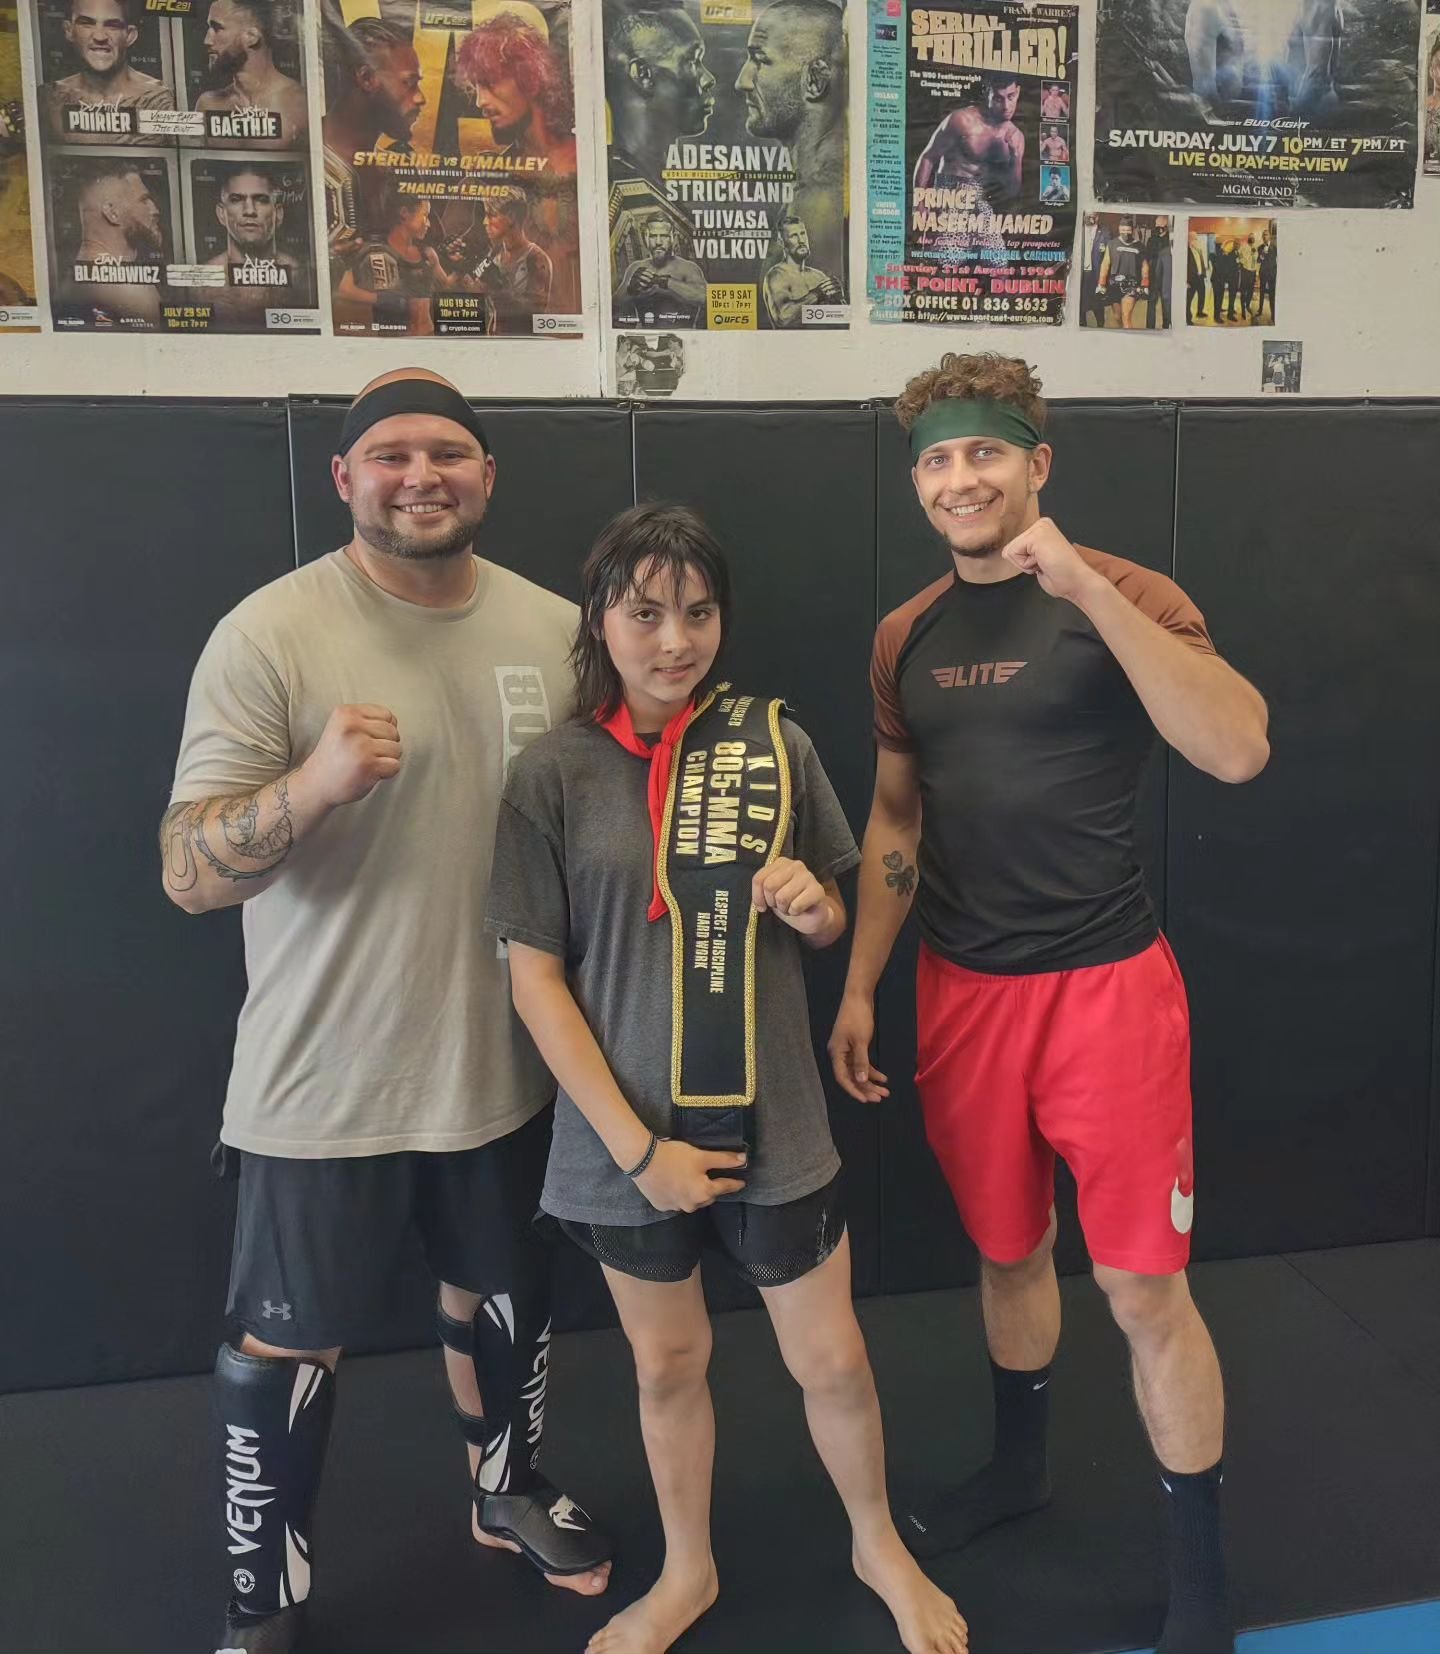 We got ourselves a new champion AND a new red rank in our class!!! Give it up for Lilly, THE UNDISPUTED KIDS 805 MMA CHAMPION OF THE WORLD 🌍 🏆#undisputed #champion #805mma